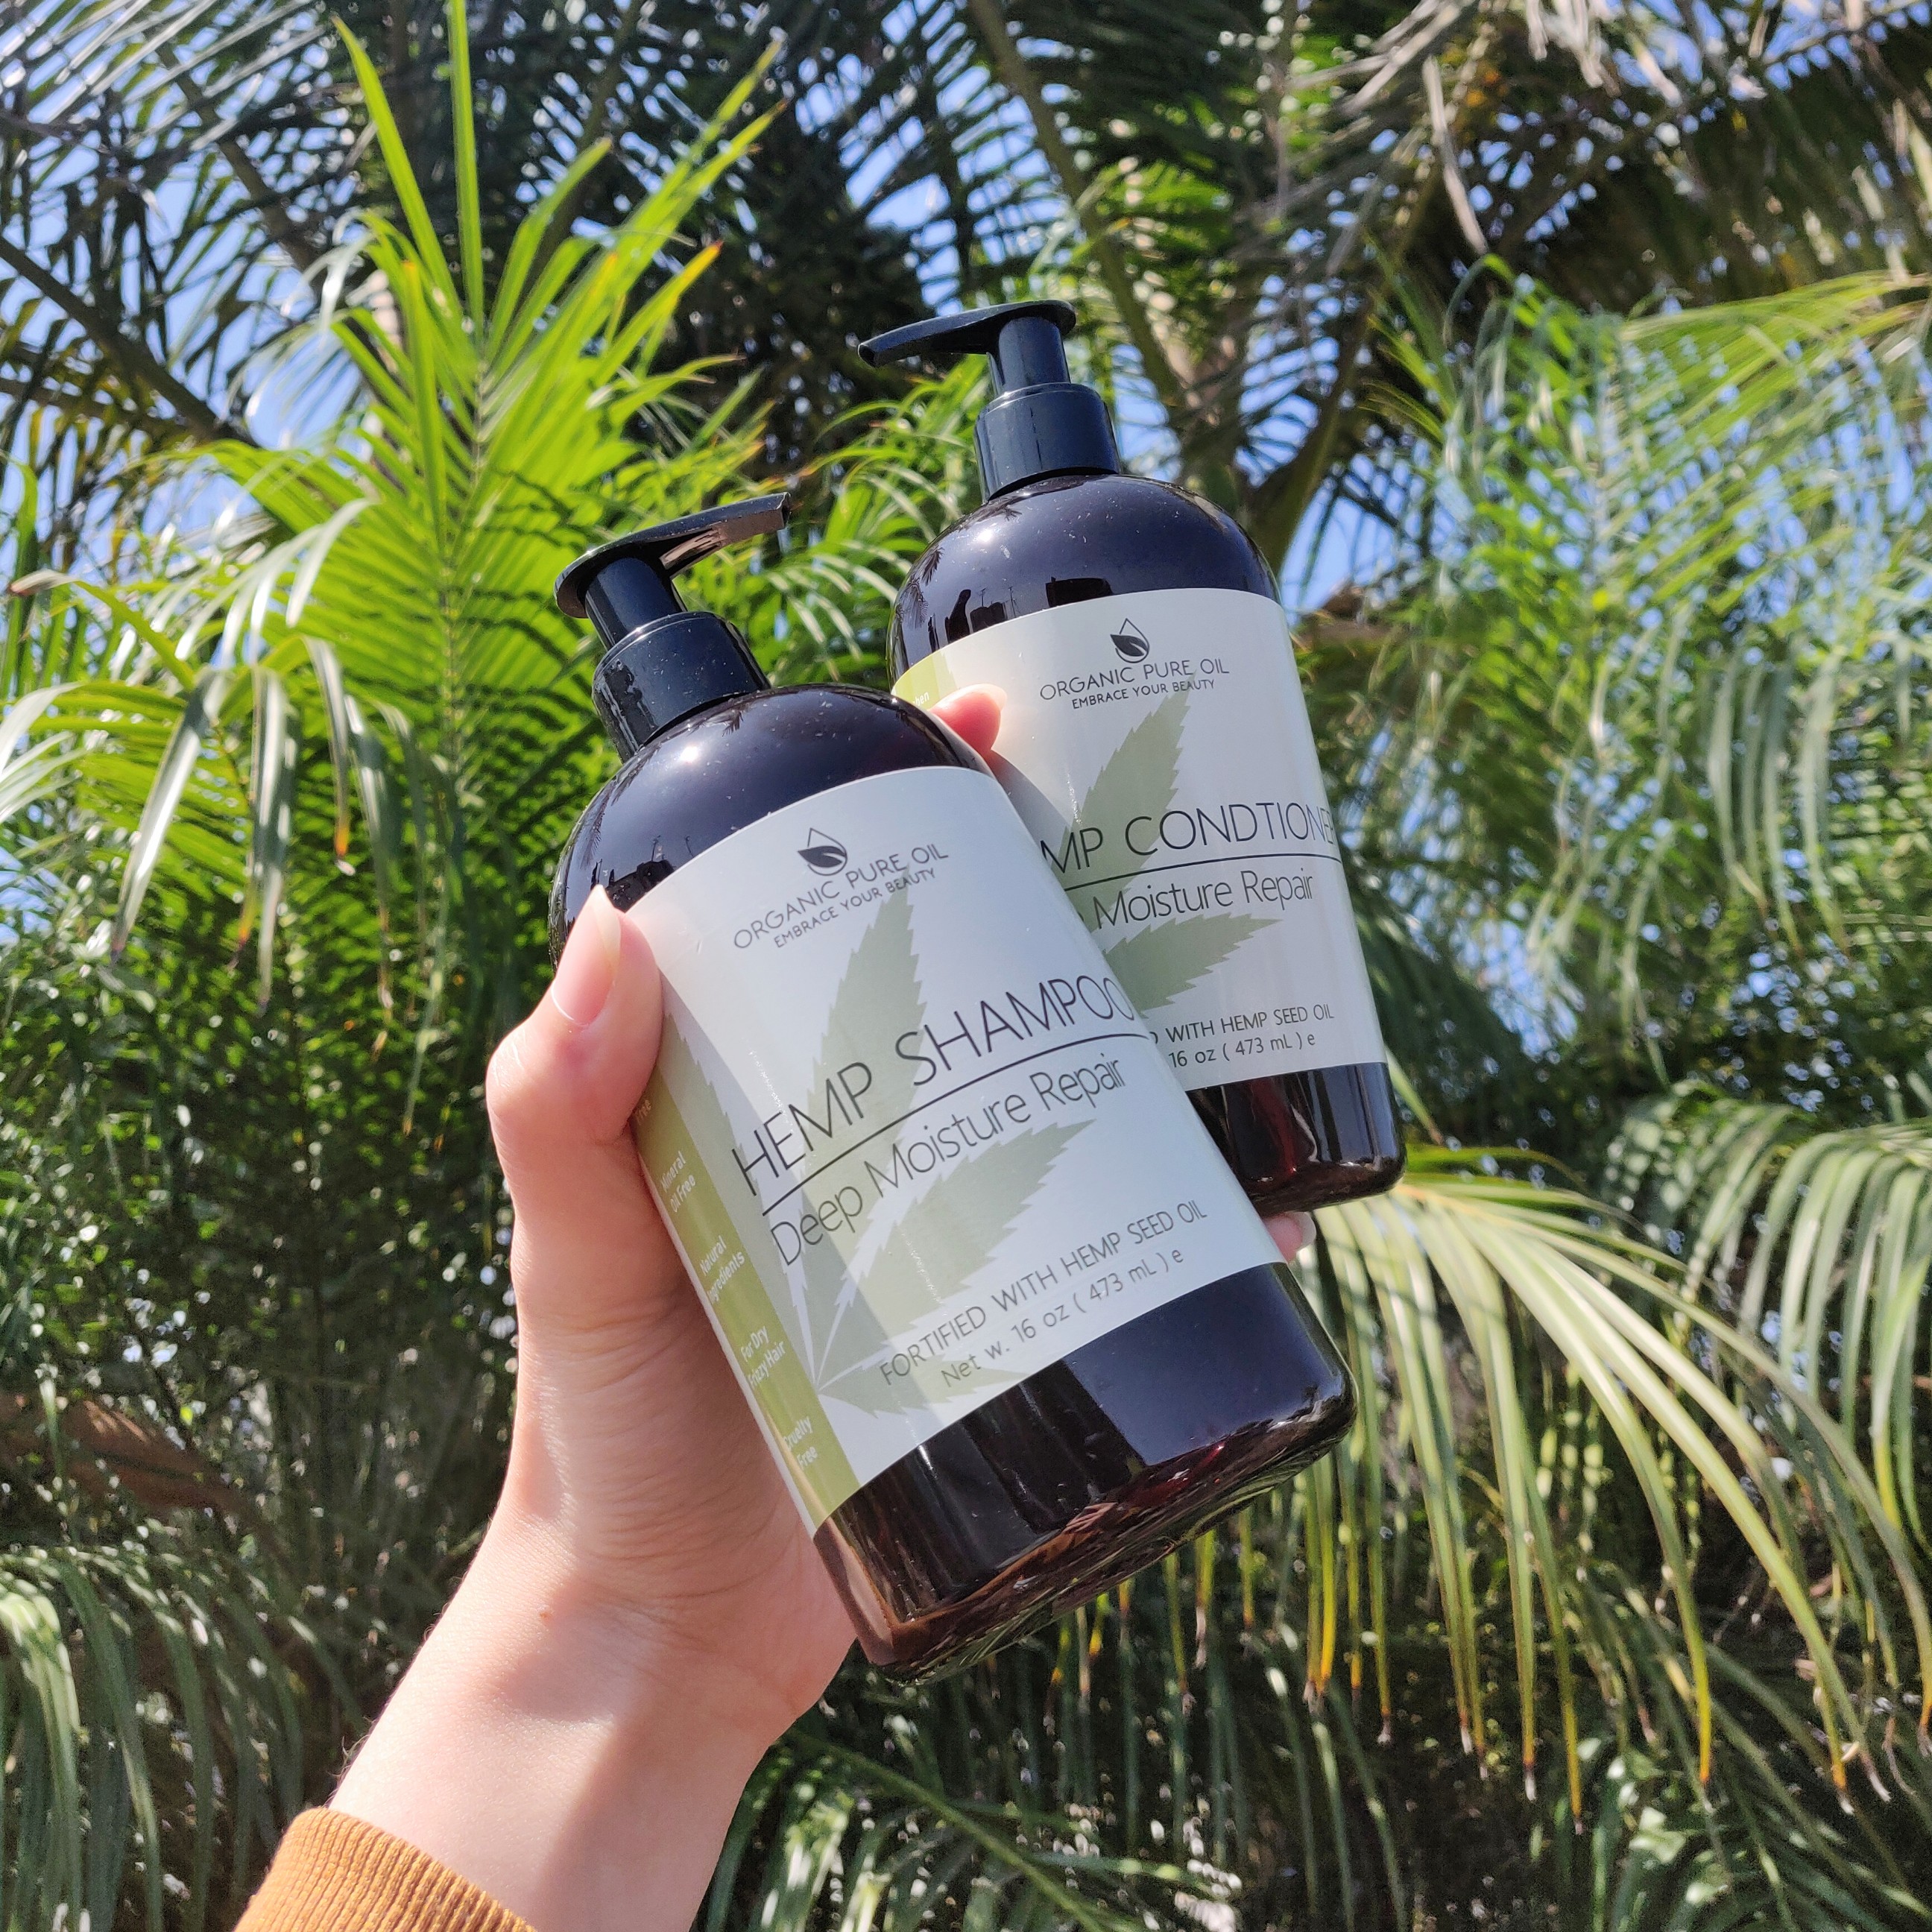 Hemp Extract Deep Moisture Repair Shampoo and Conditioner set for all hair types